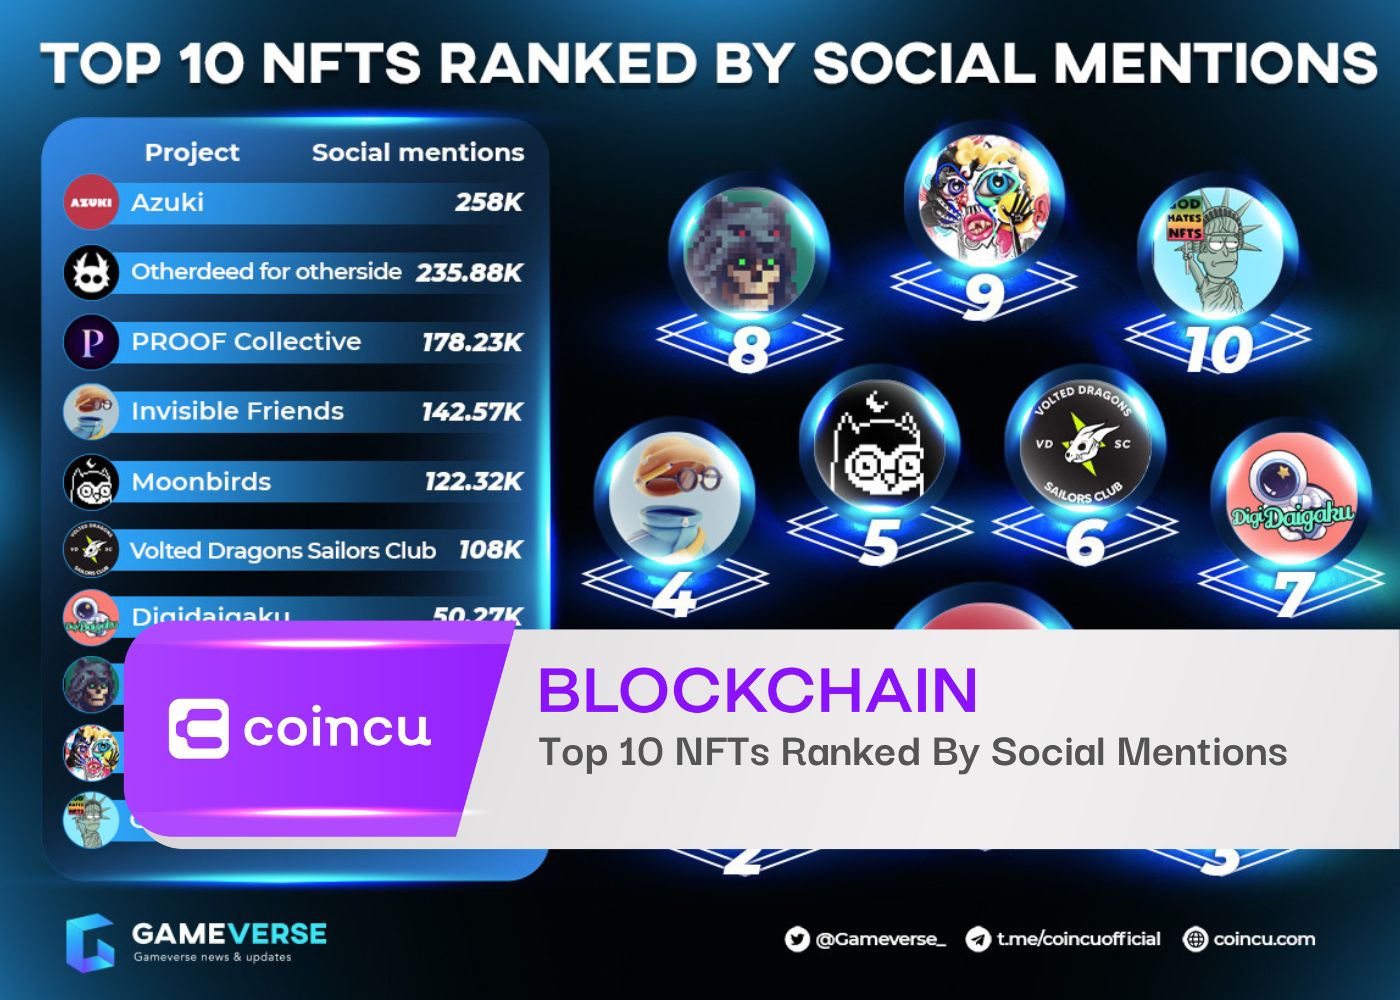 Top 10 NFTs Ranked By Social Mentions